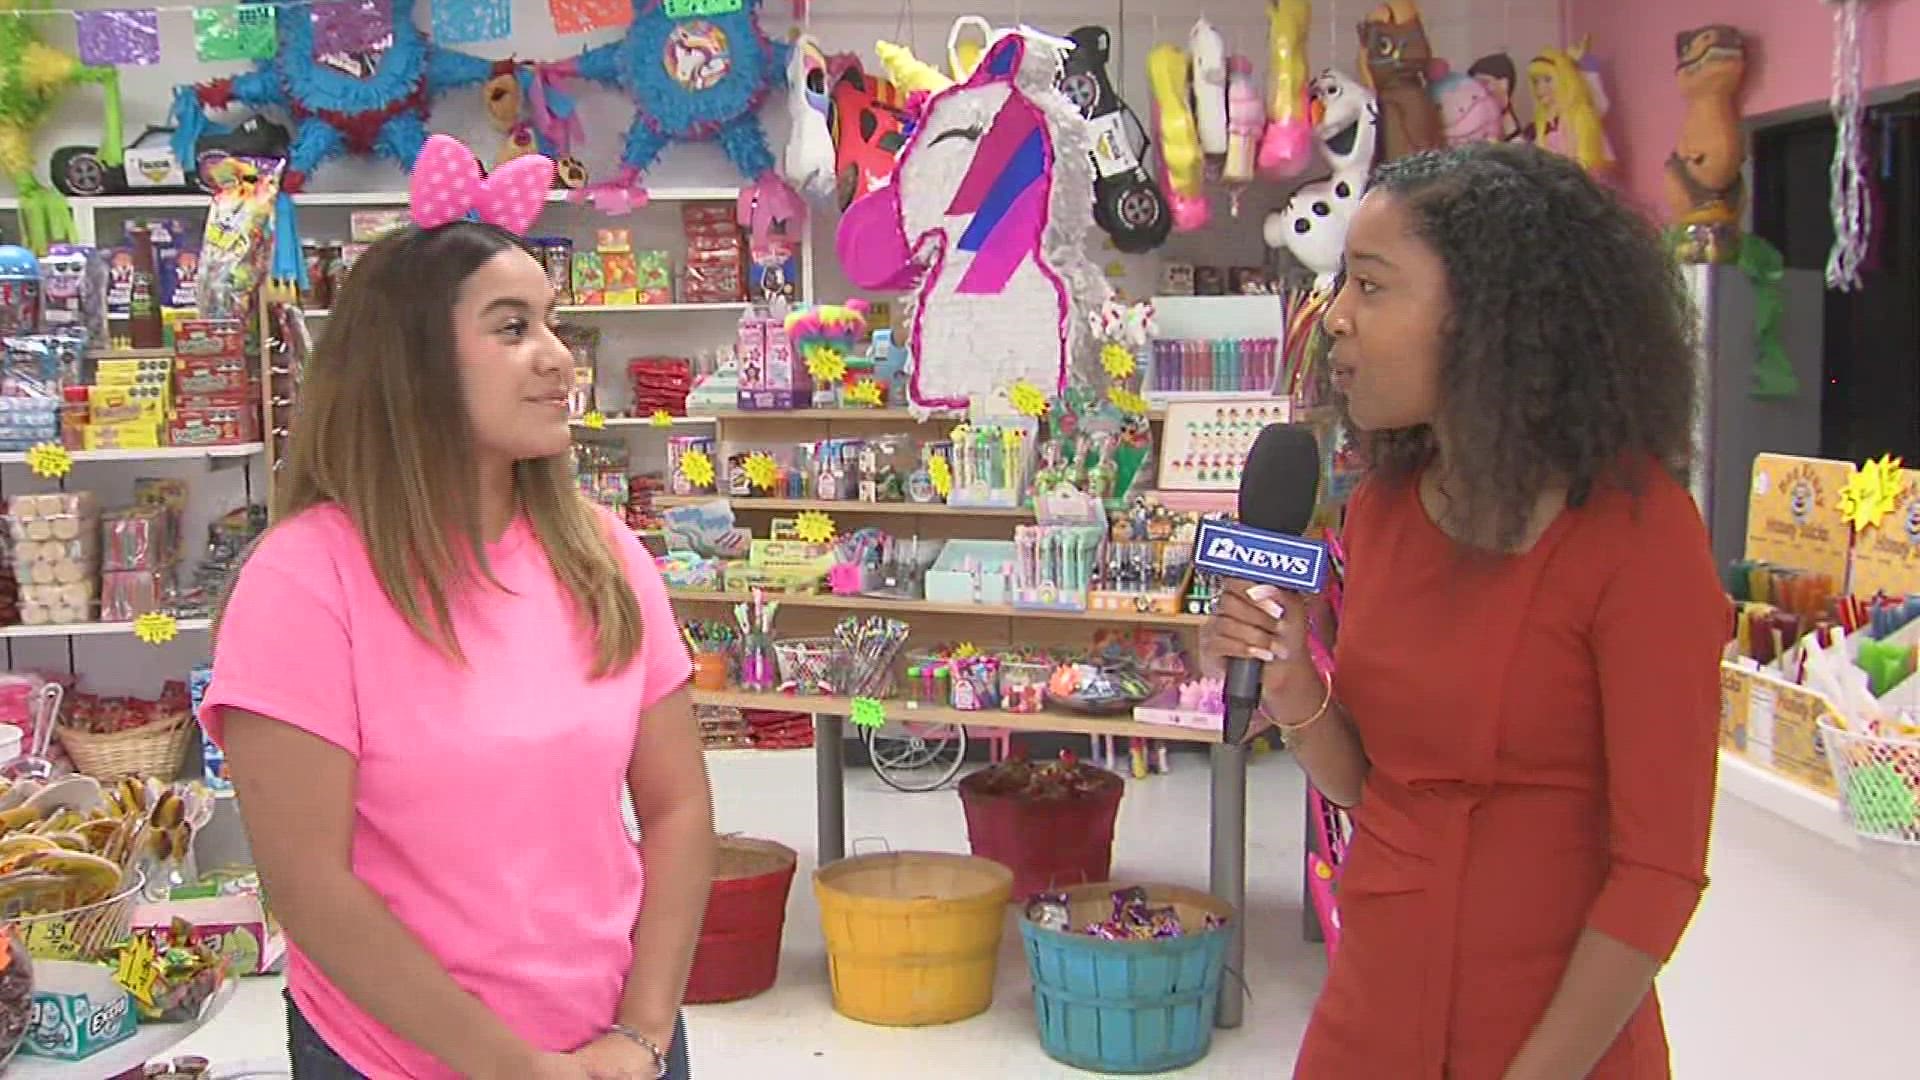 At Victoria's Candy they're celebrating Hispanic Heritage month with traditional Mexican candy.